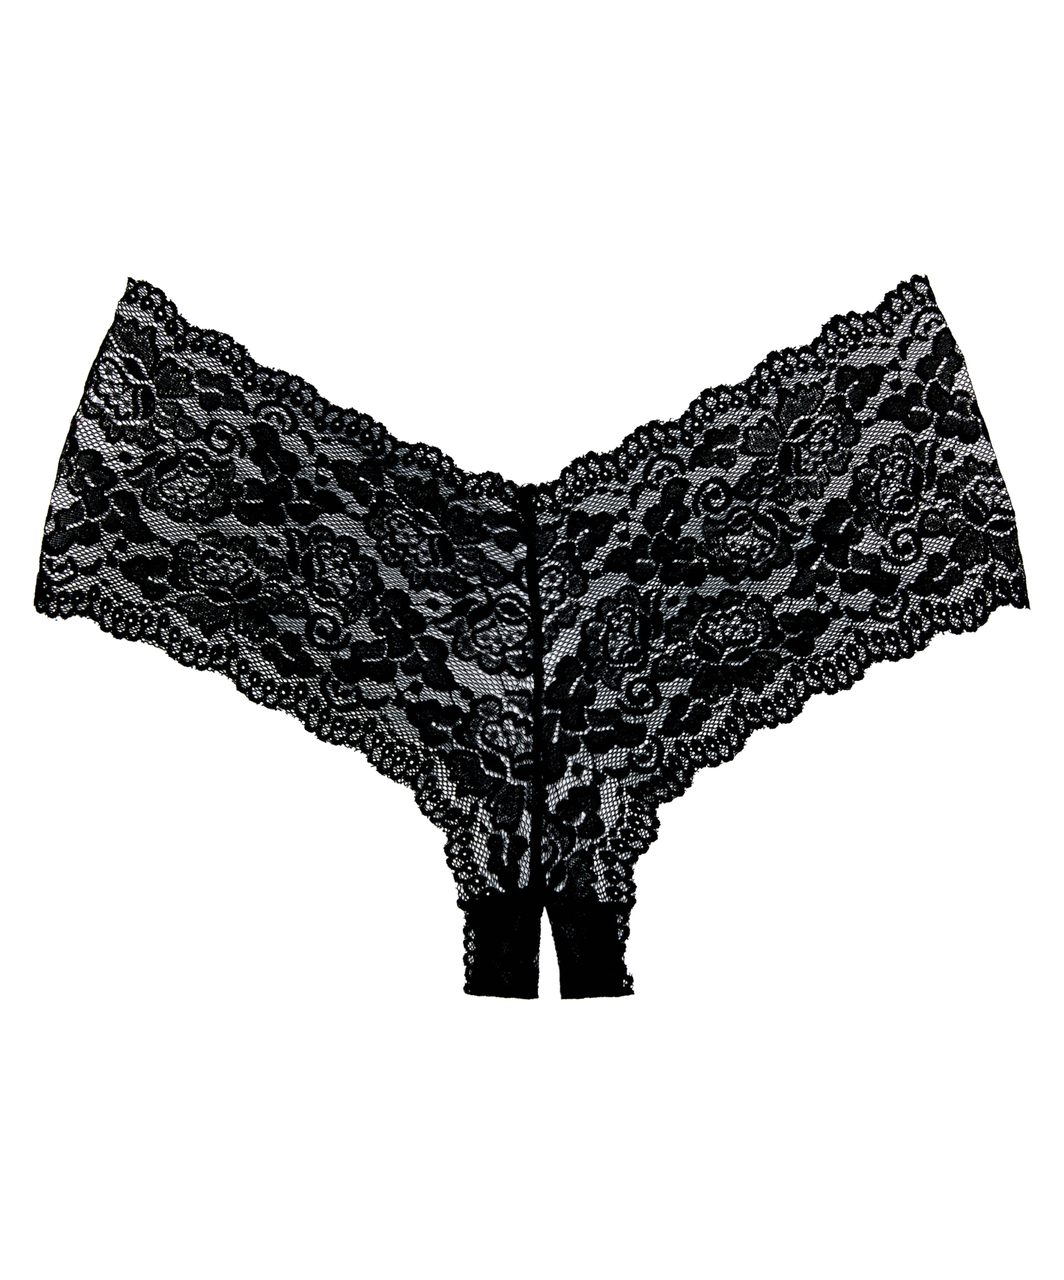 Allure Lingerie Candy Apple black lace crotchless shorts